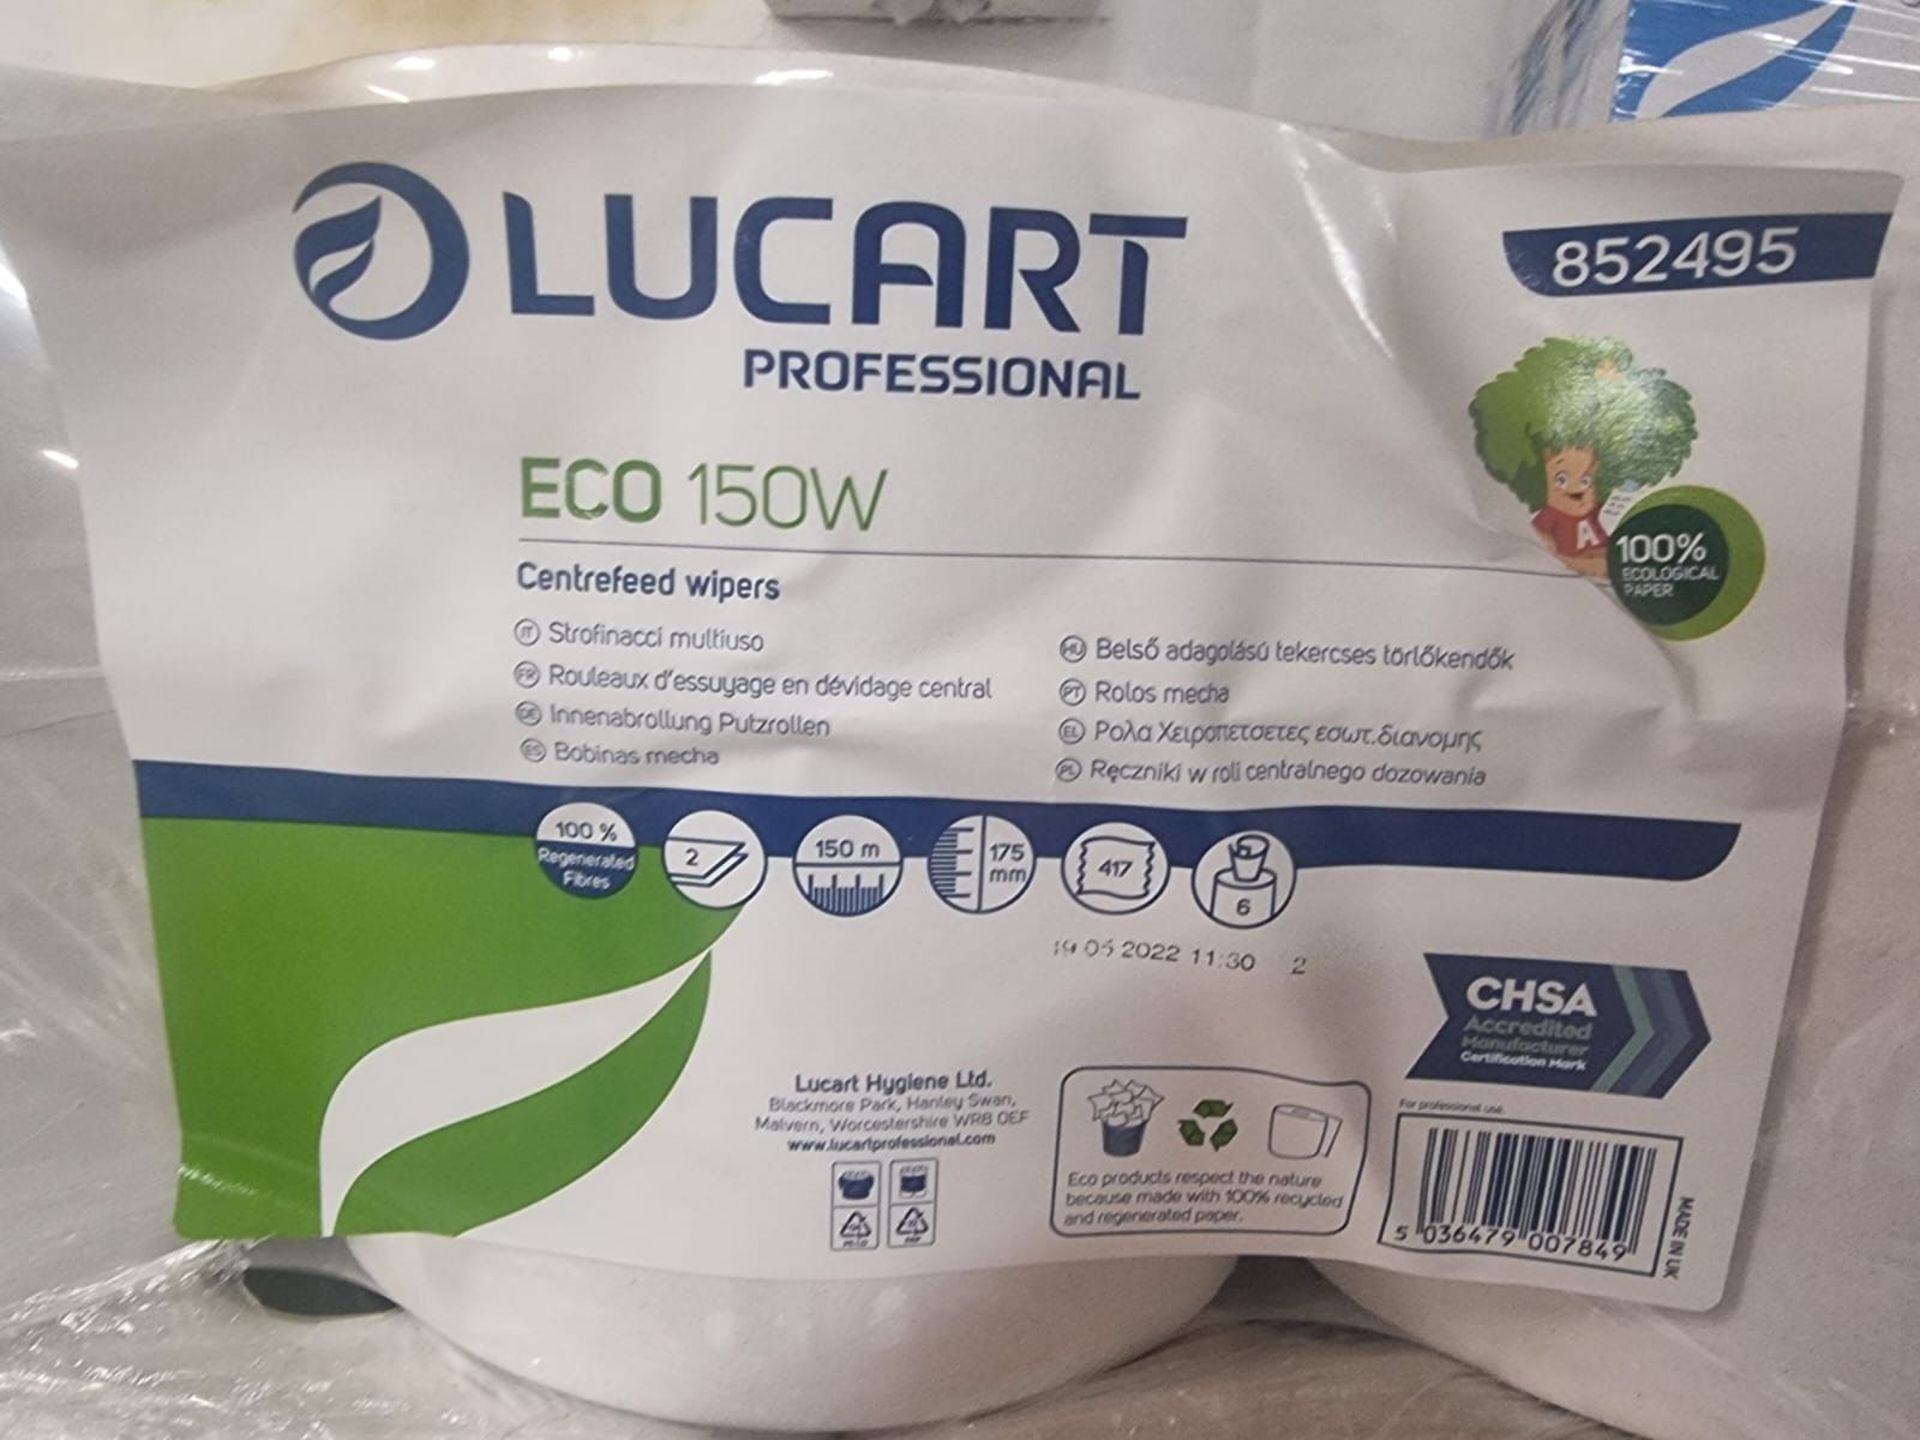 Pallet To Contain 24 x New Packs of 6 Lucart Professional Eco 150W Centrefeed Wipers. 150m x - Bild 3 aus 3